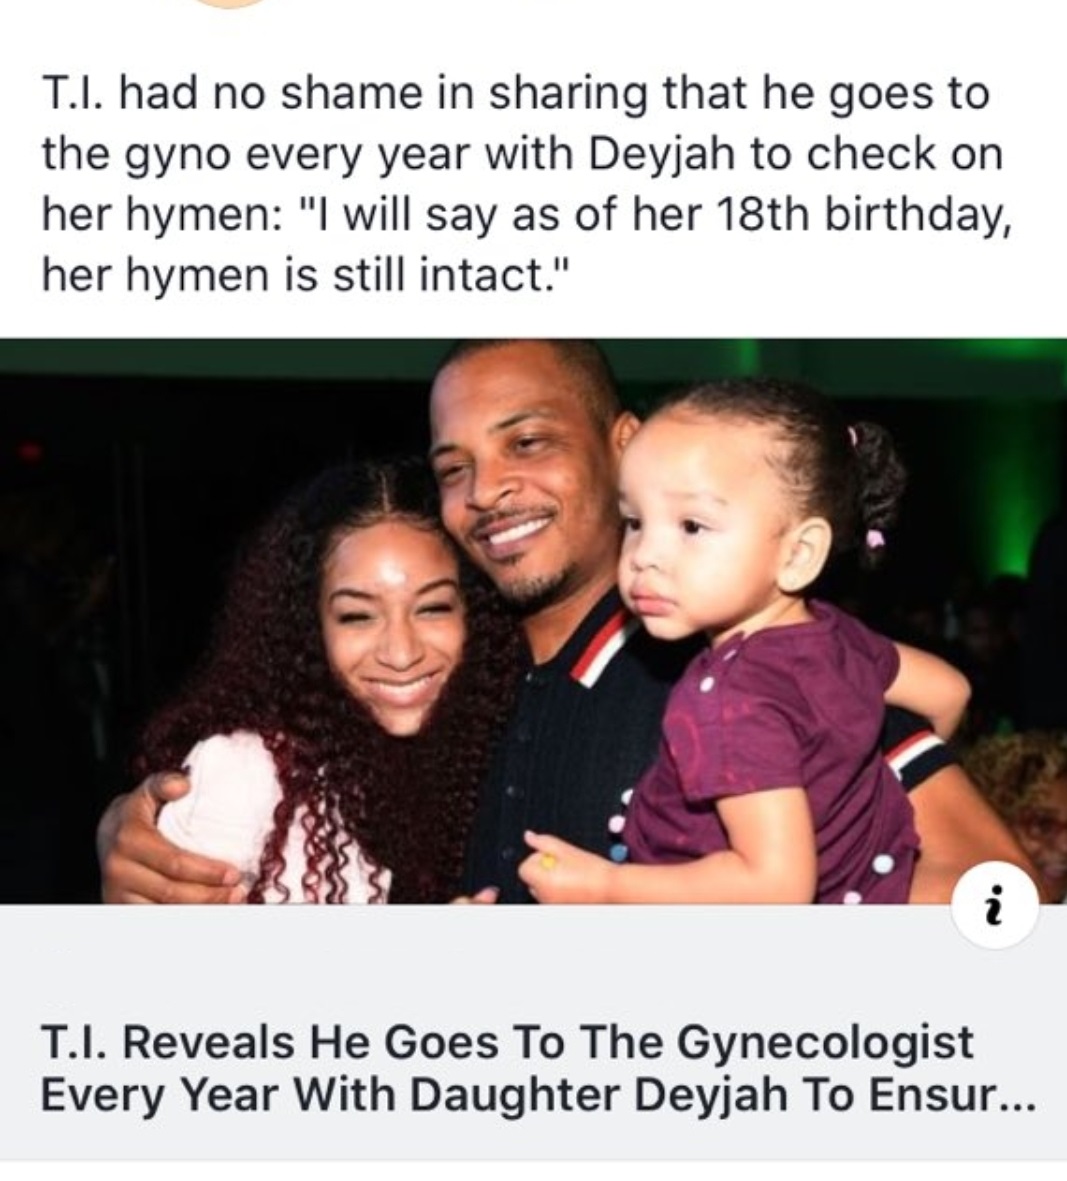 ti daughter deyjah harris - T.I. had no shame in sharing that he goes to the gyno every year with Deyjah to check on her hymen "I will say as of her 18th birthday, her hymen is still intact." T.I. Reveals He Goes To The Gynecologist Every Year With Daught